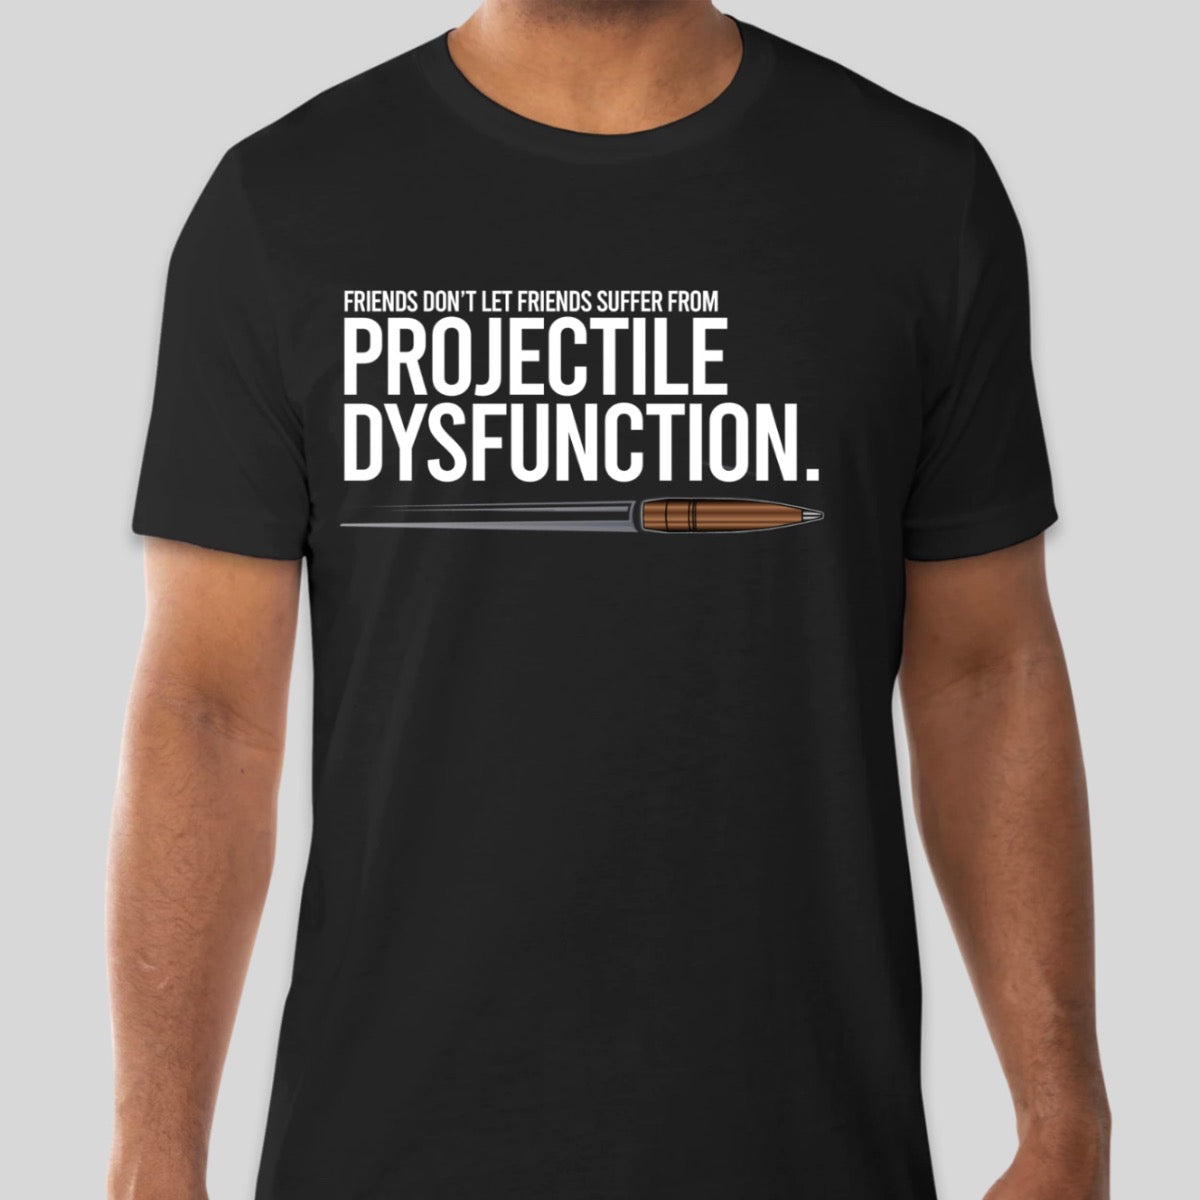 black t-shirt with "Friends don't let friends suffer from Projectile dysfunction" with bullet image on front